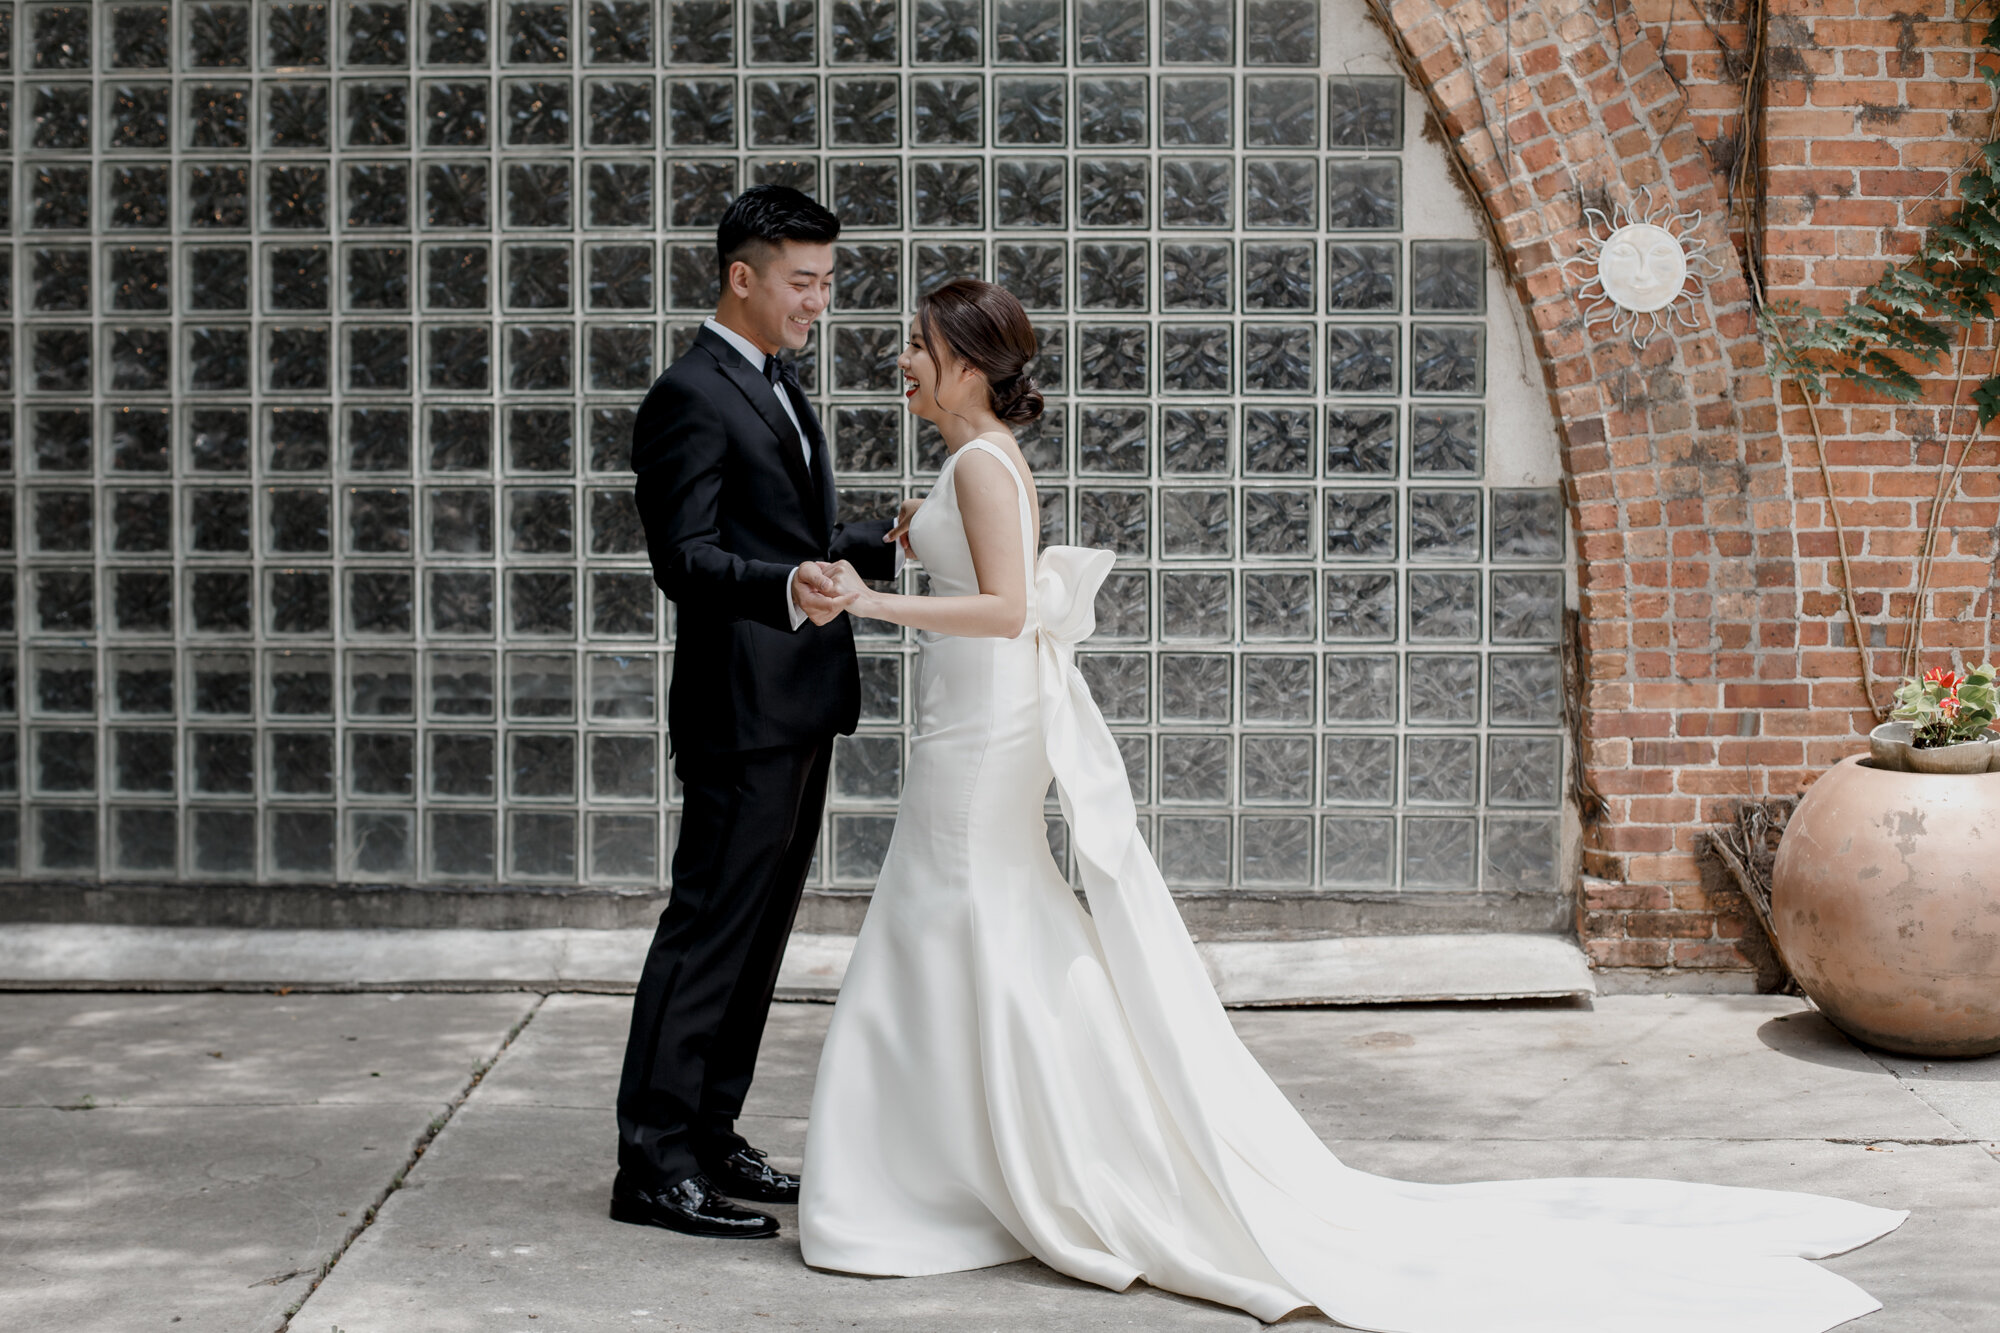 First look with bride - groom's reaction. Urban Elegant East Asian Wedding at Ronin 2